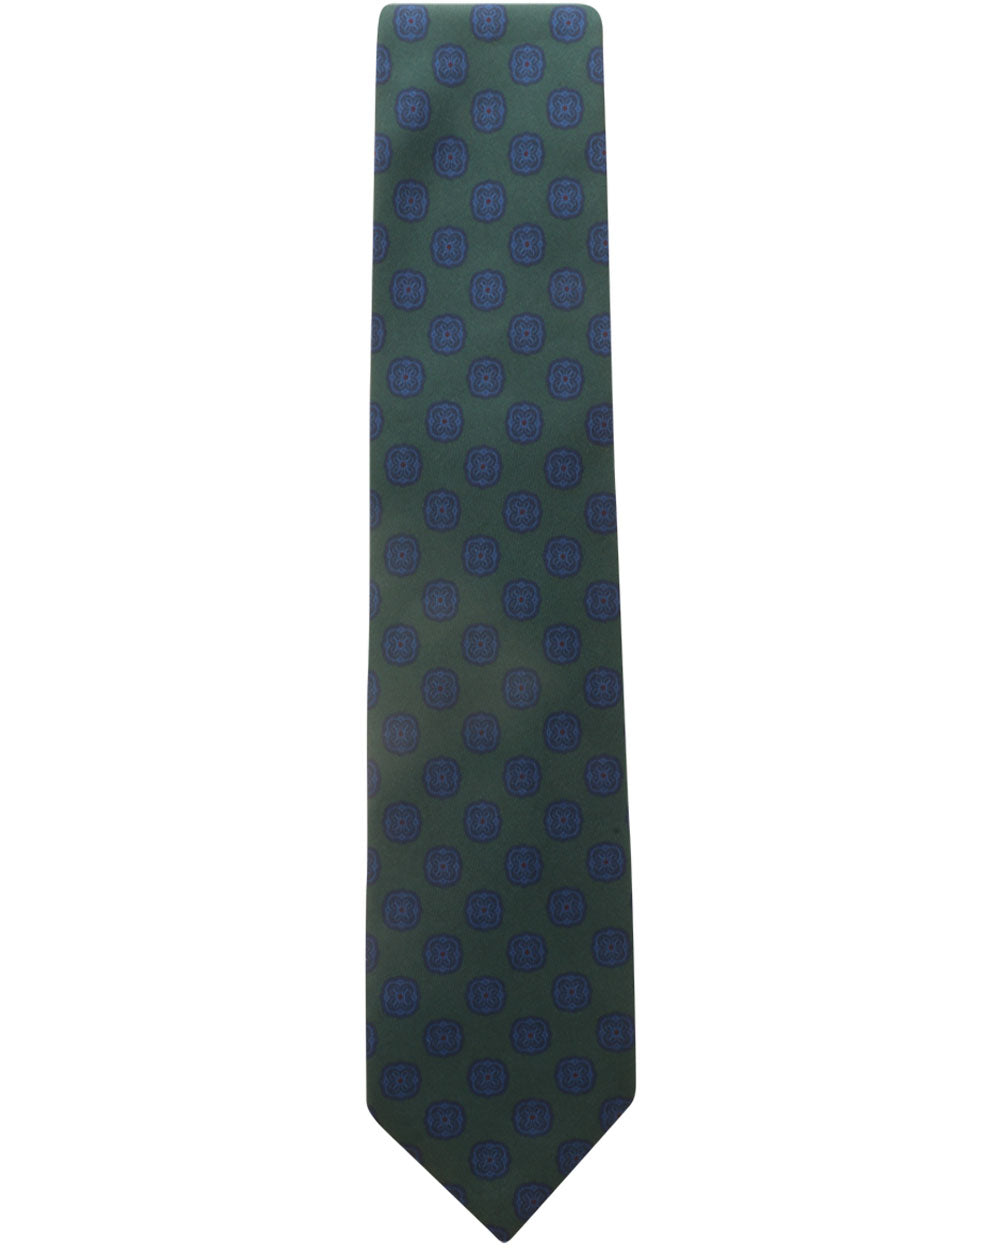 Green and Royal Blue Medallion Silk Tie